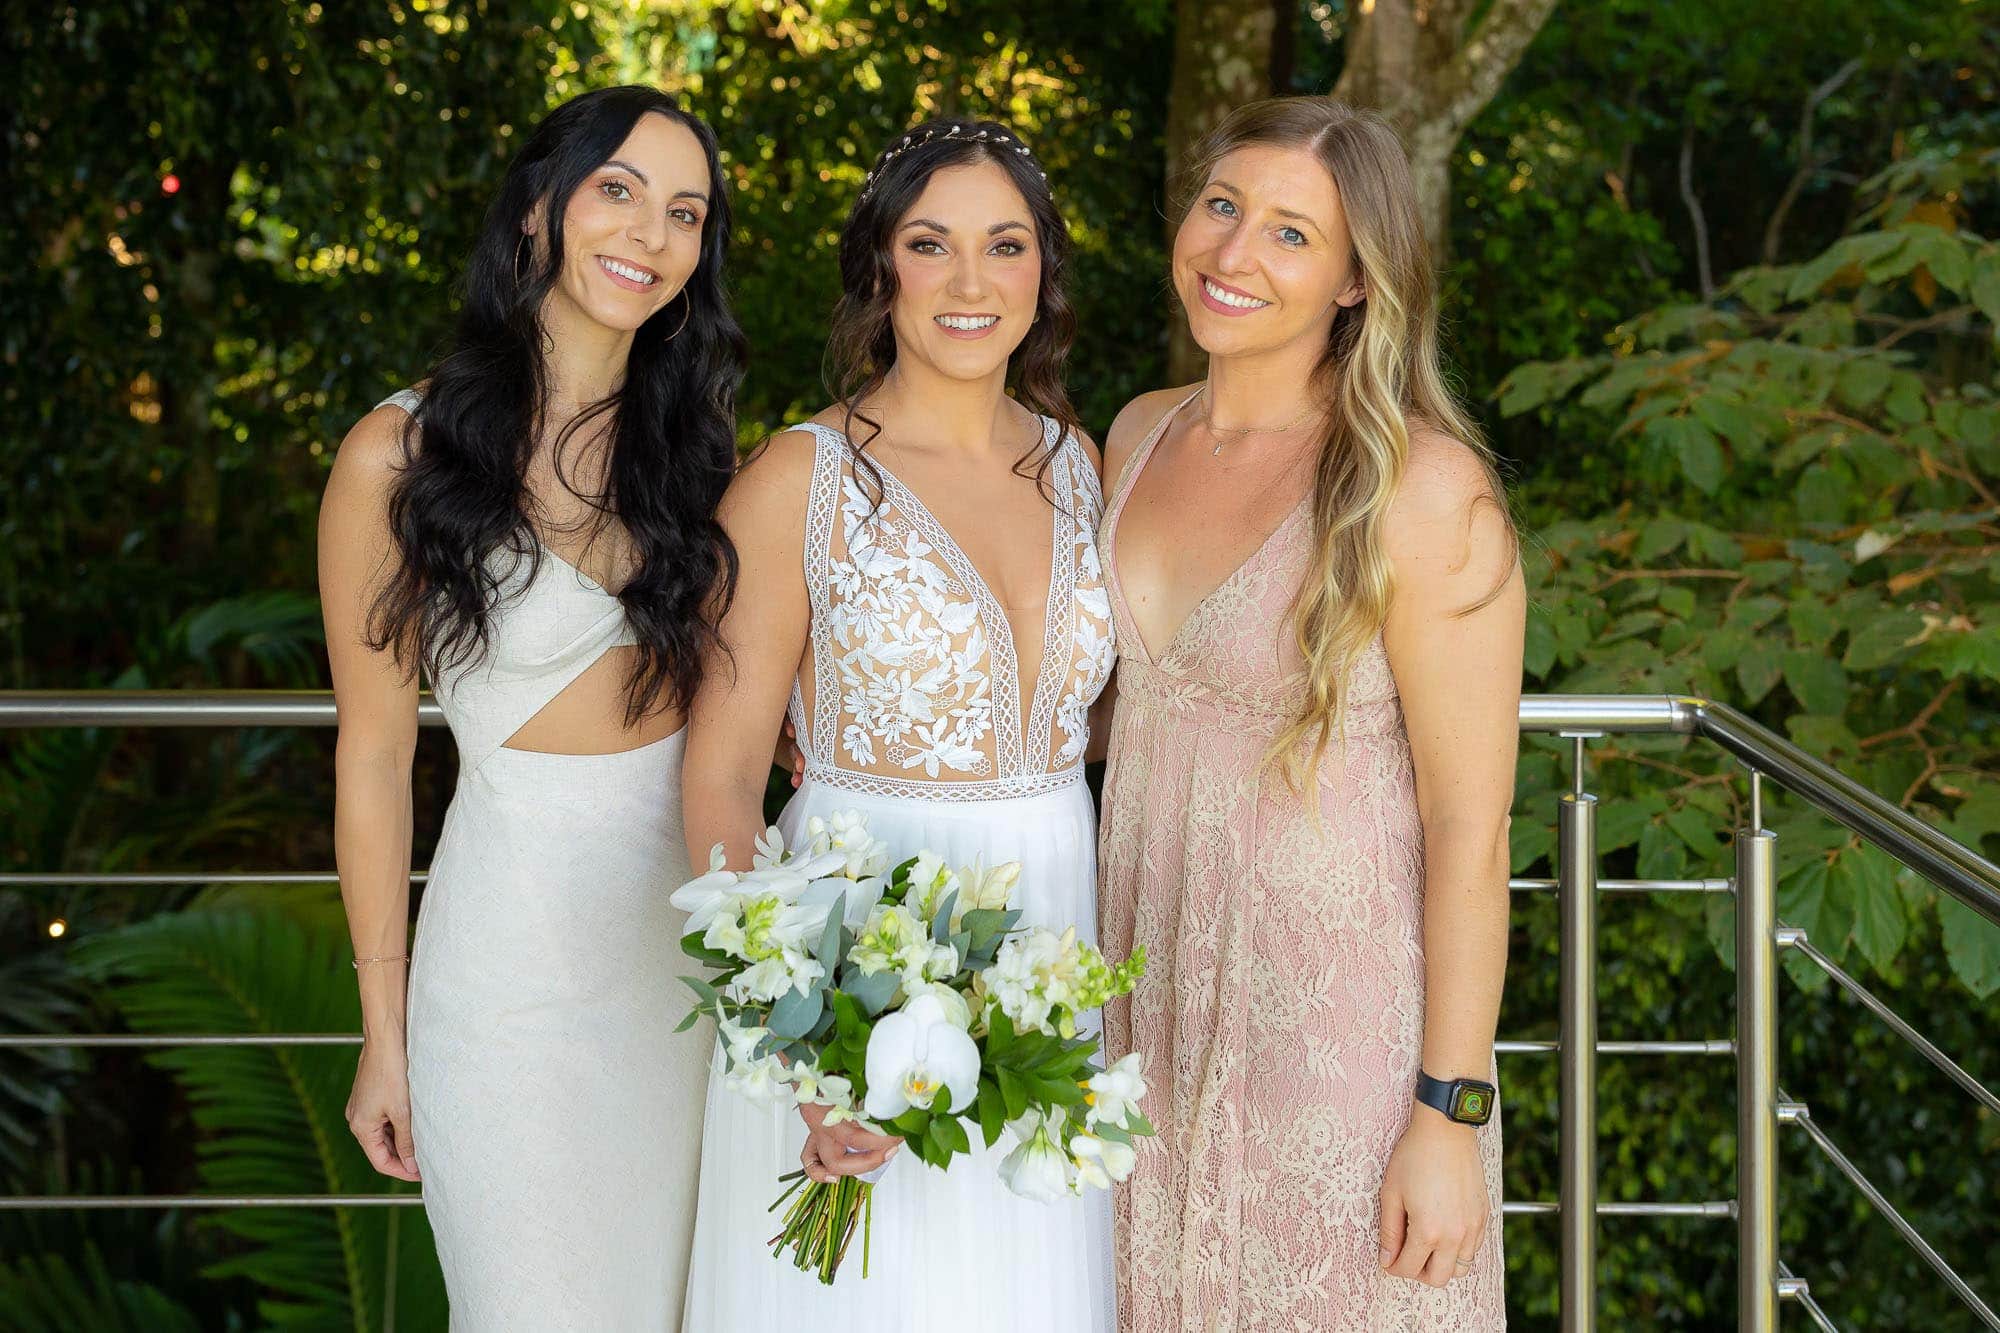 The bride and her friends before the small wedding in Costa Rica